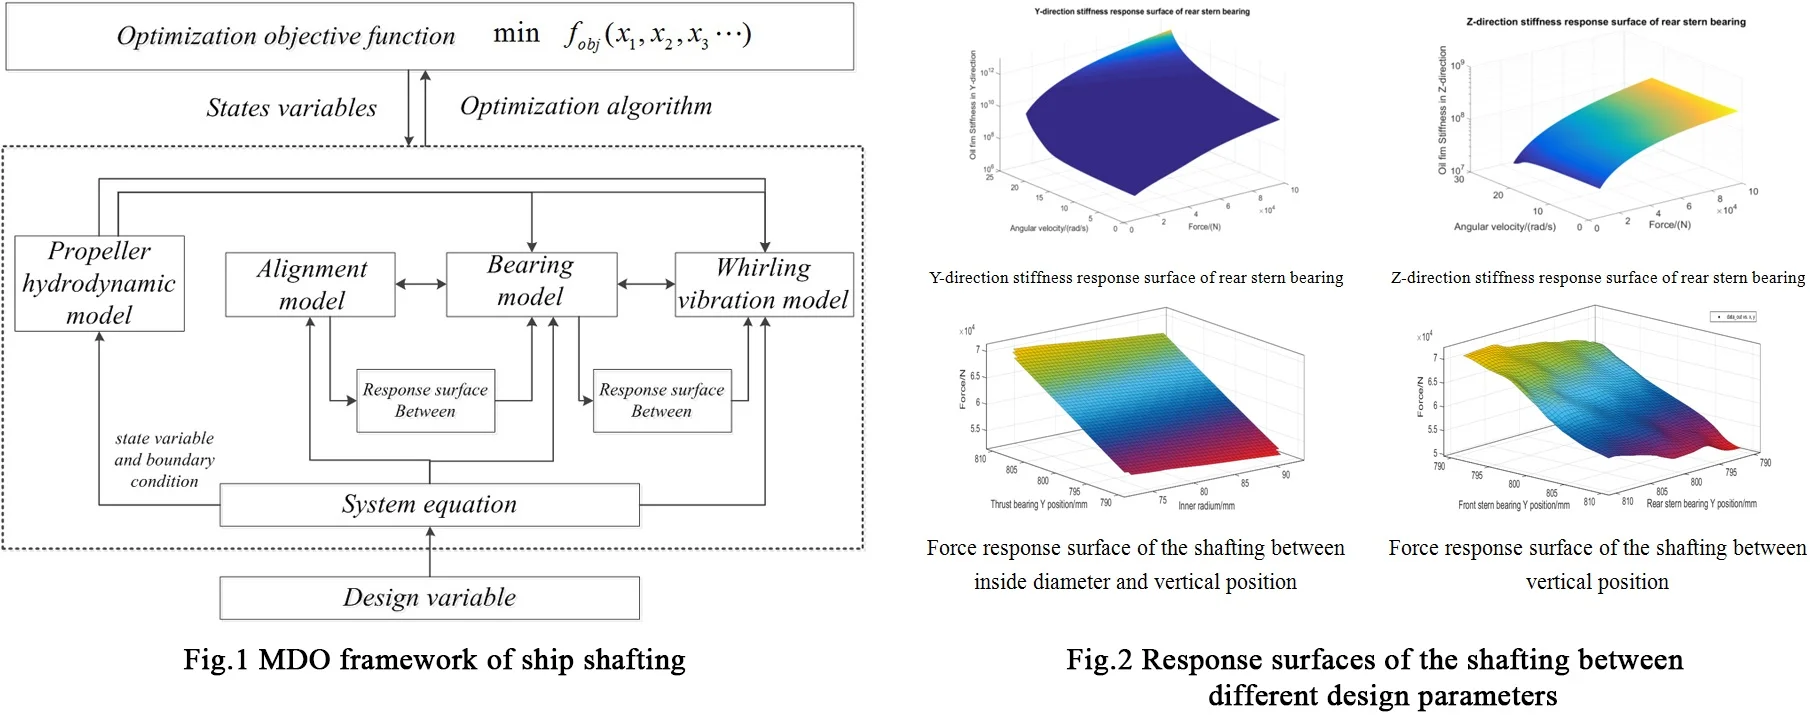 Coupling characteristic analysis of ship shafting design parameters and research on multidisciplinary design optimization